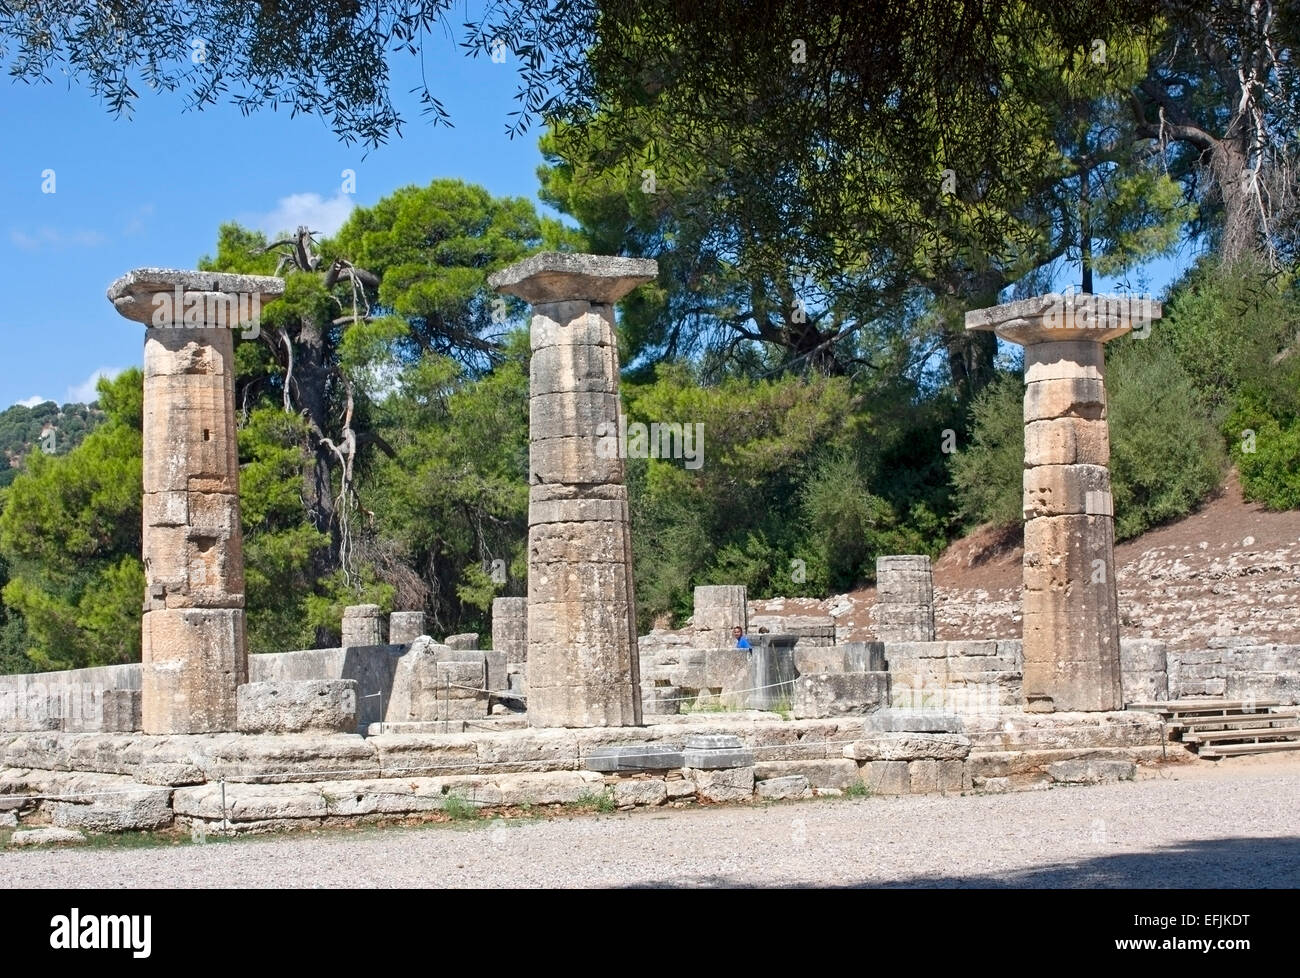 Doric columns in the ruins of the Temple of Hera , Ancient Olympia, The Peloponnese, Greece Stock Photo